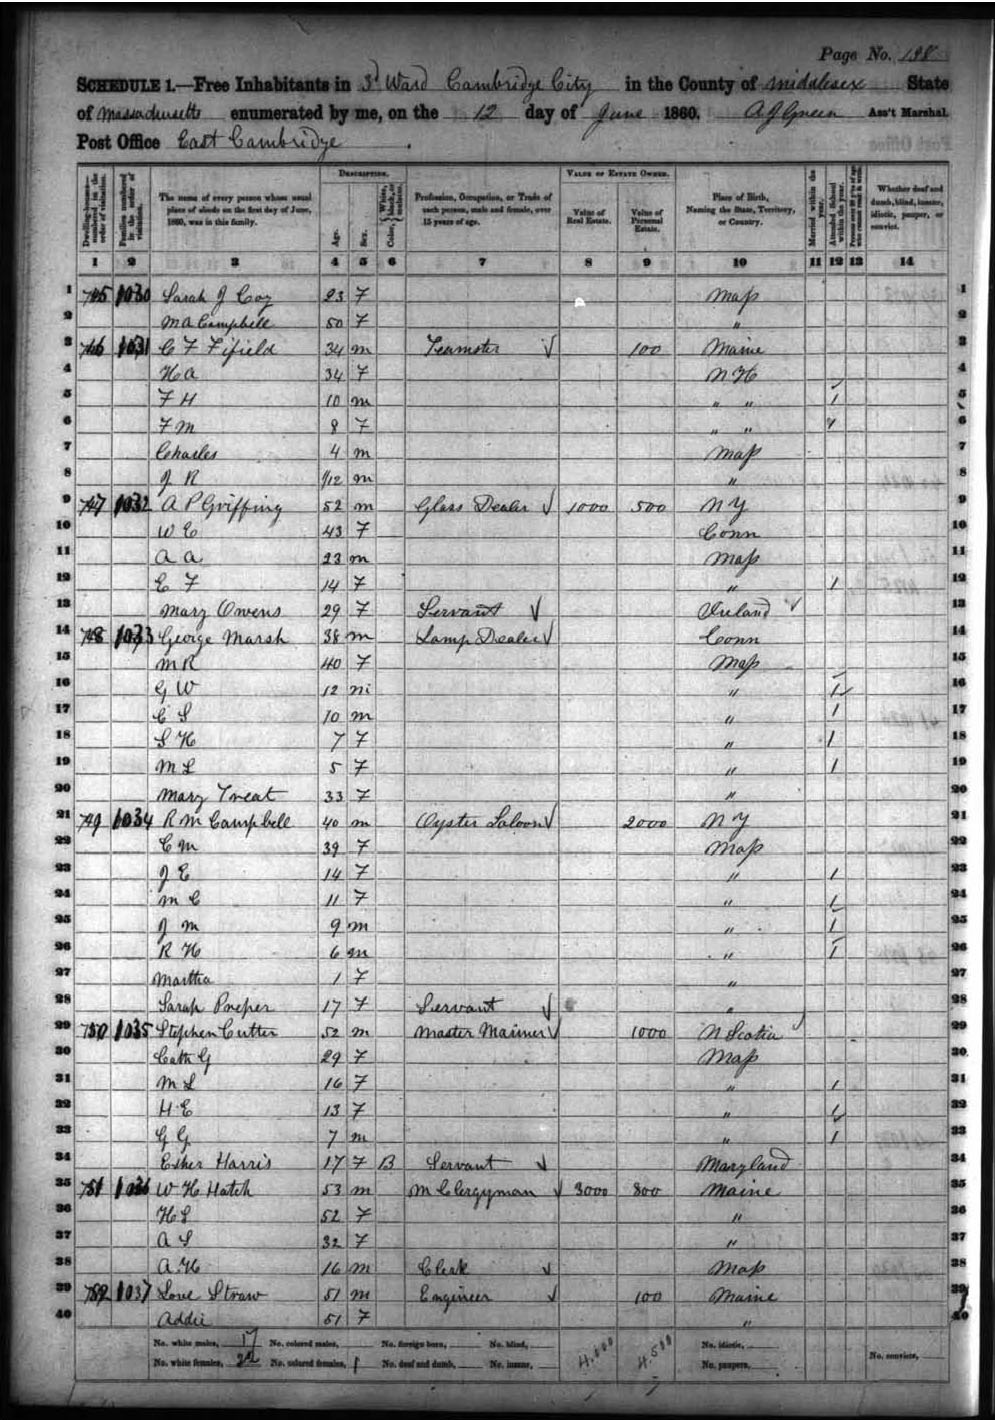 1860 Census showing Griffing